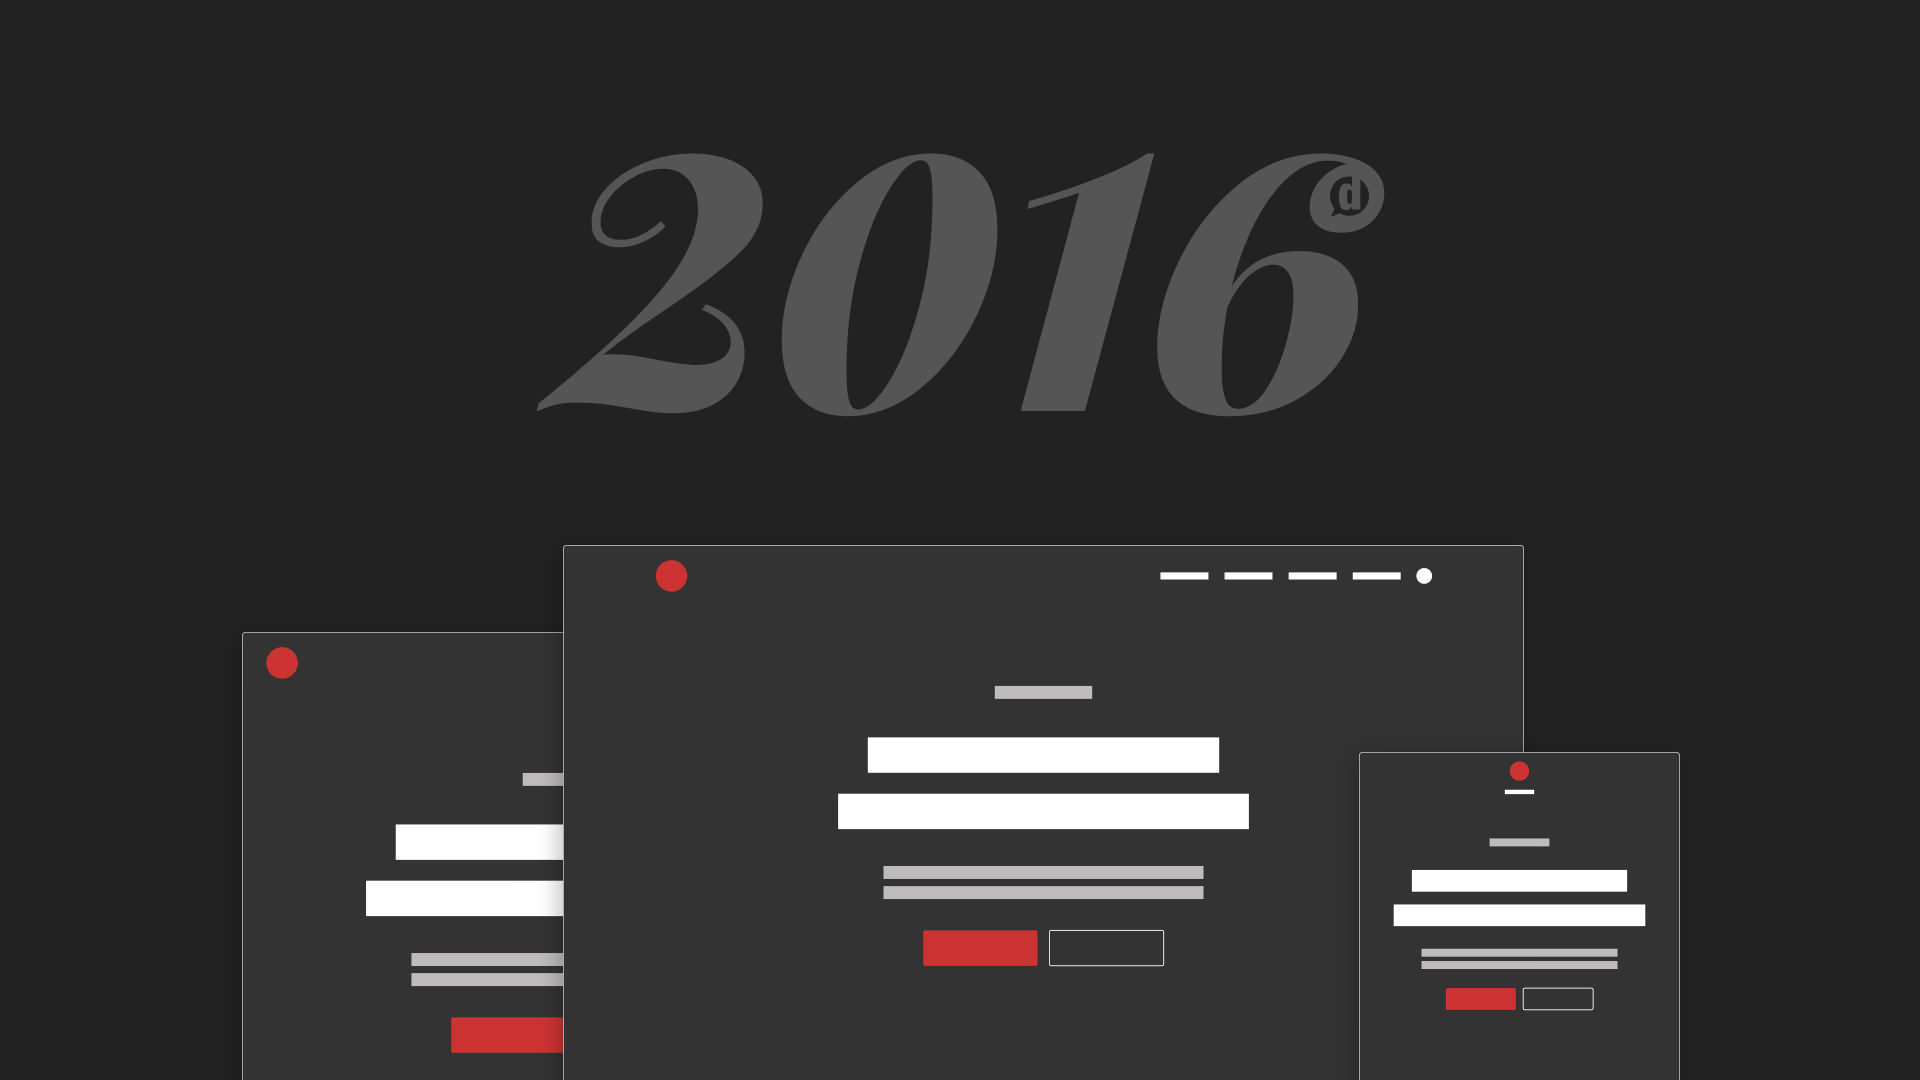 Method to My Madness: Redesign 2016